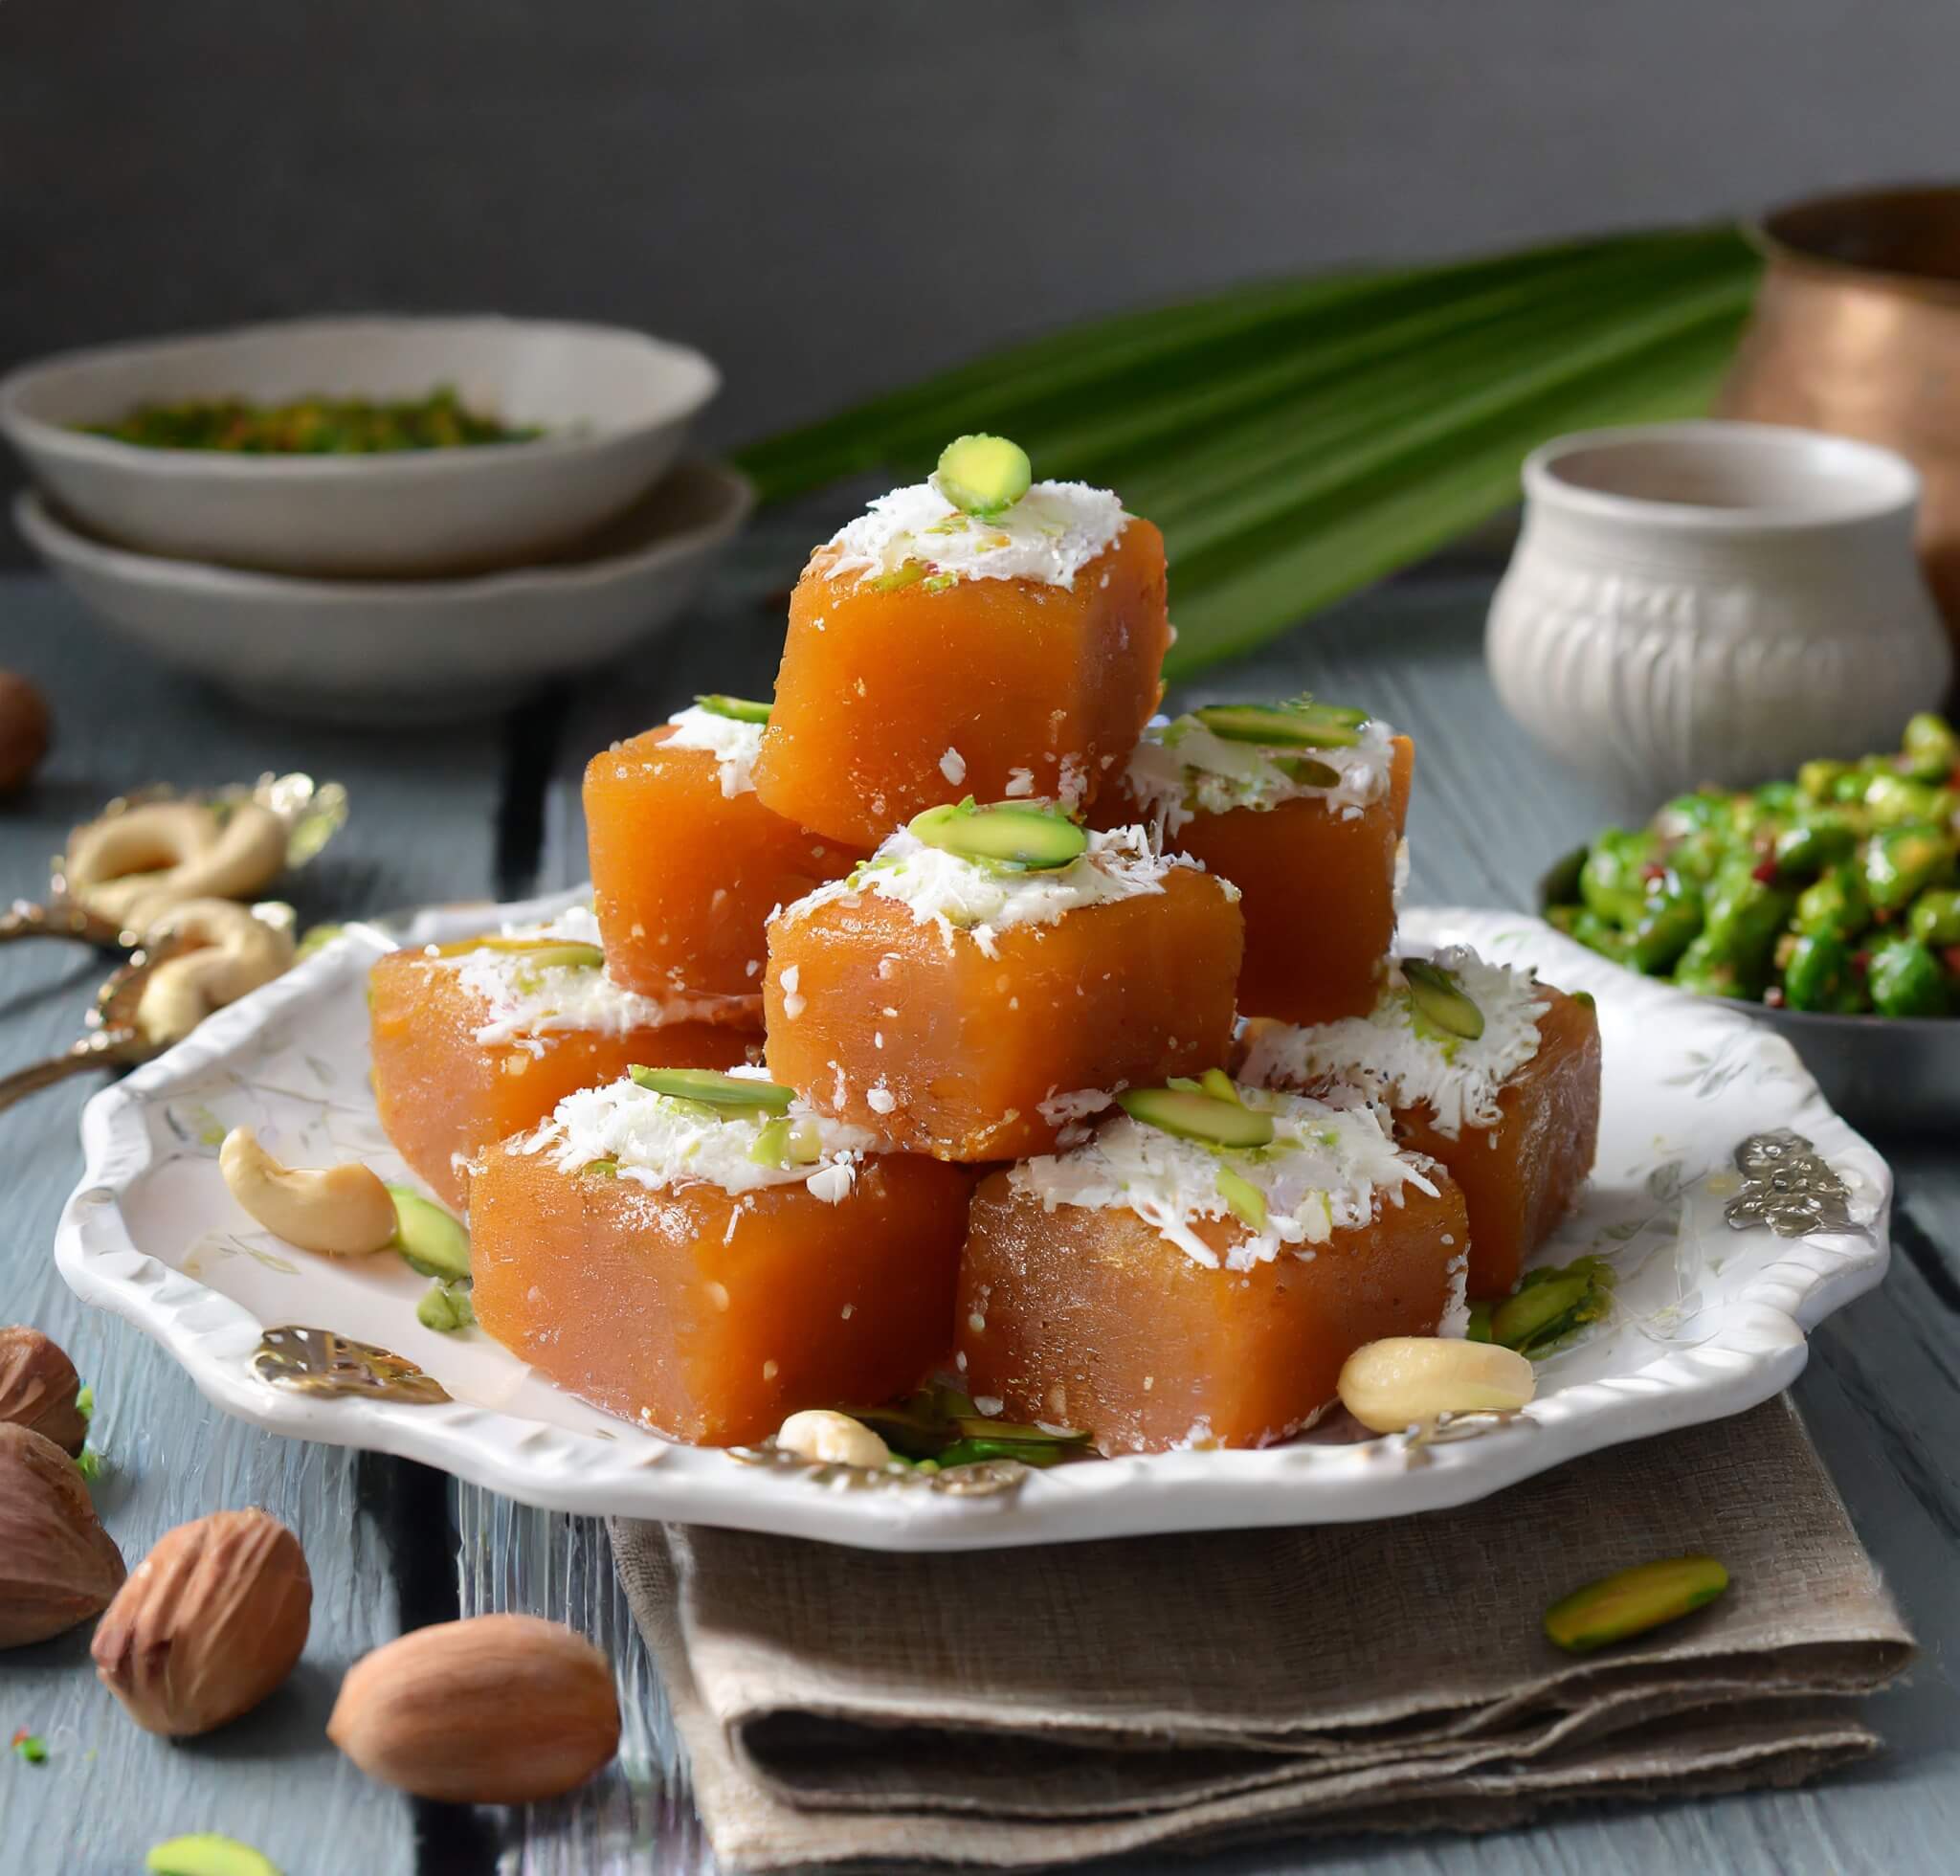 Khalid Sweets and Bakers' Traditional Sweets